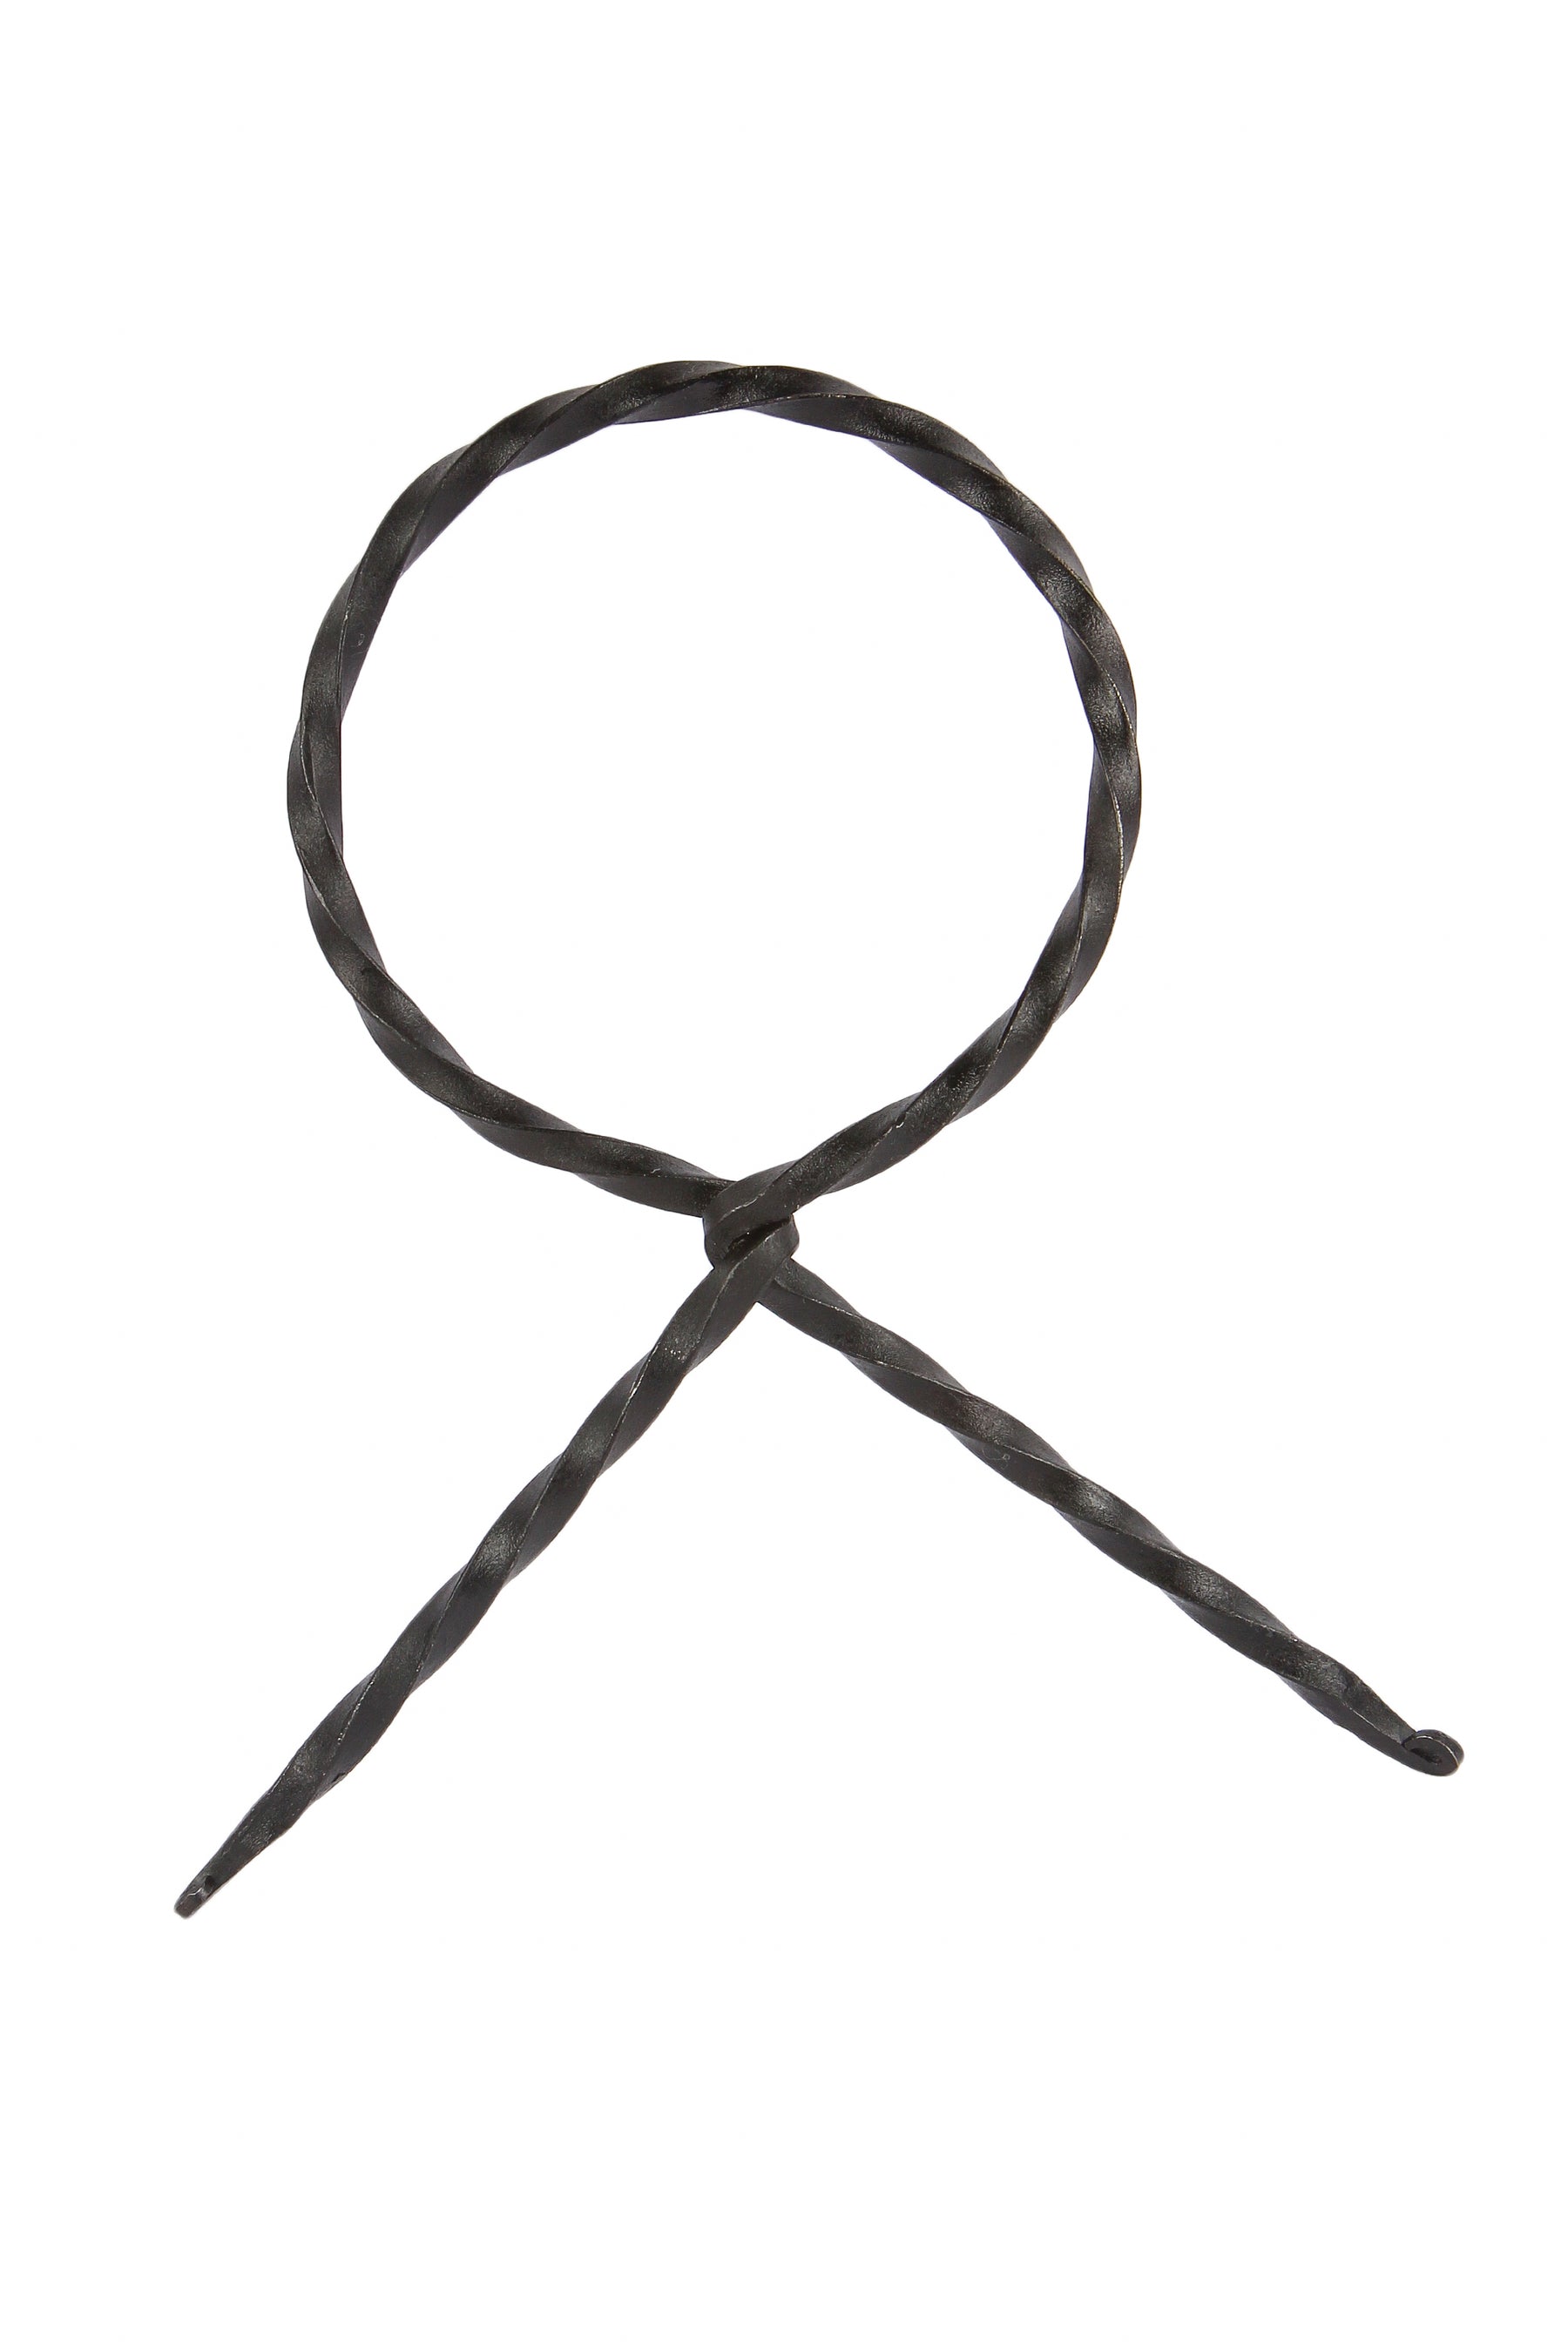 Horn stand in wrought iron, 4 sizes, 3 colors